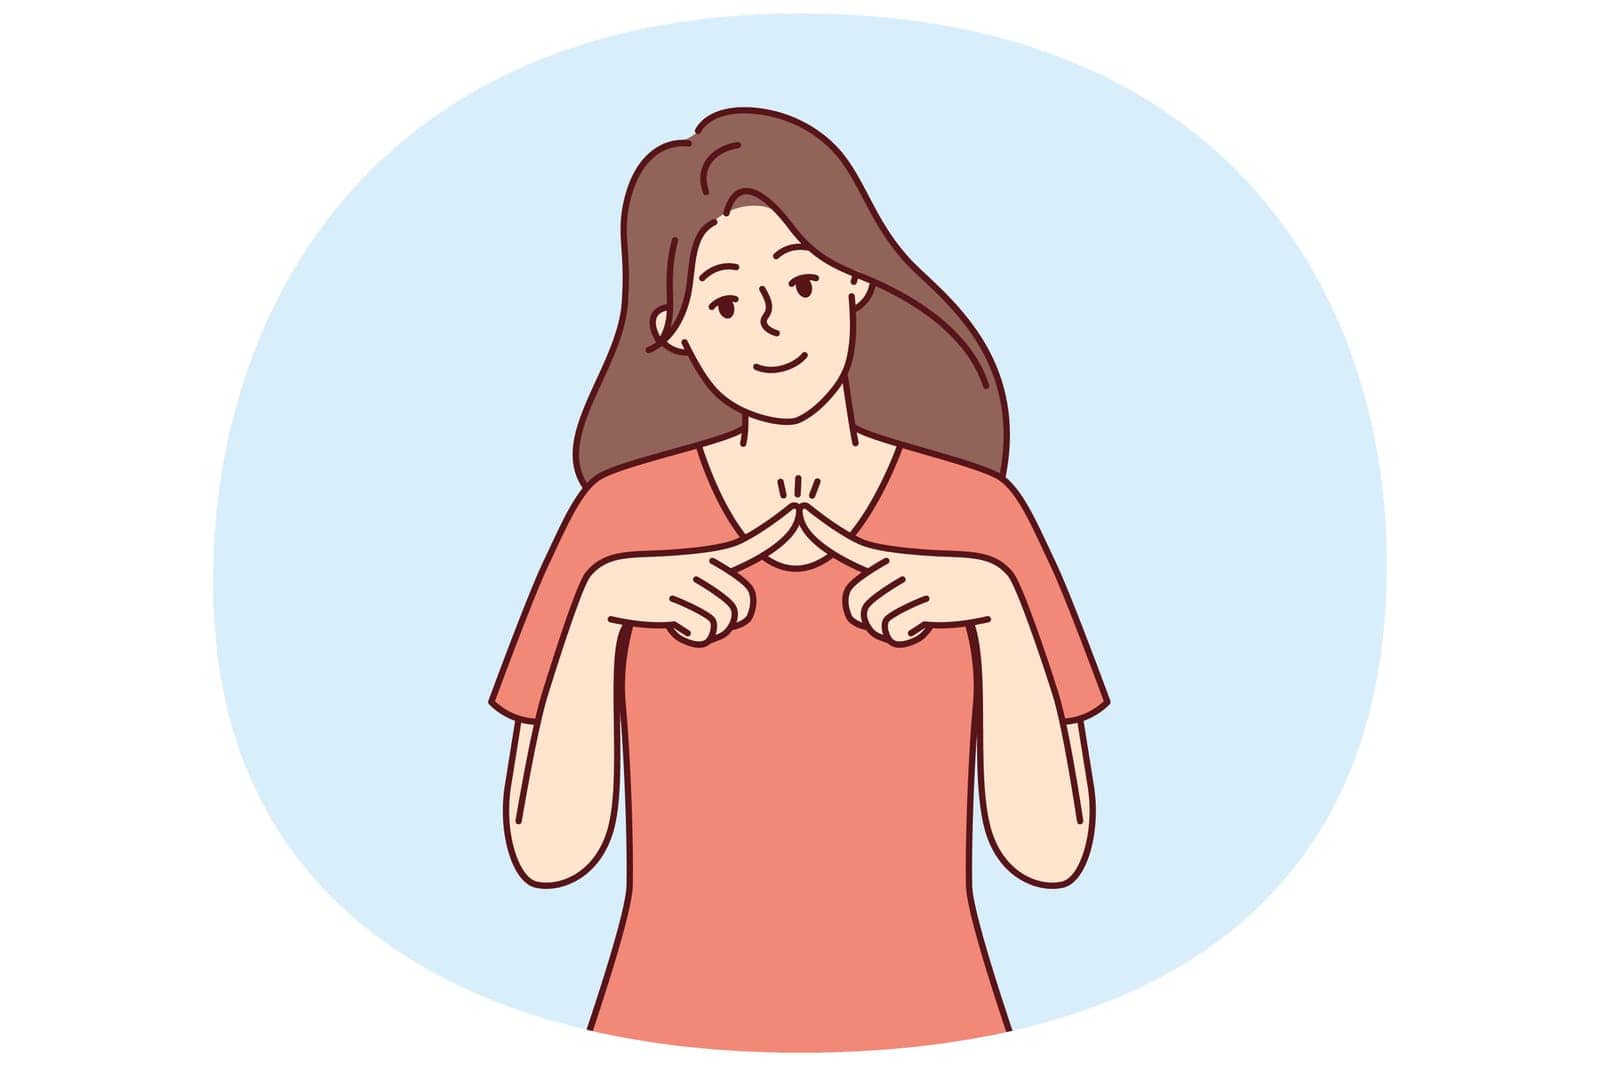 Shy girl looks at camera and joins fingers in front of chest, wanting to seduce guy. Modest young woman dressed in casual t-shirt shyly tries to flirt and attract attention of interlocutor